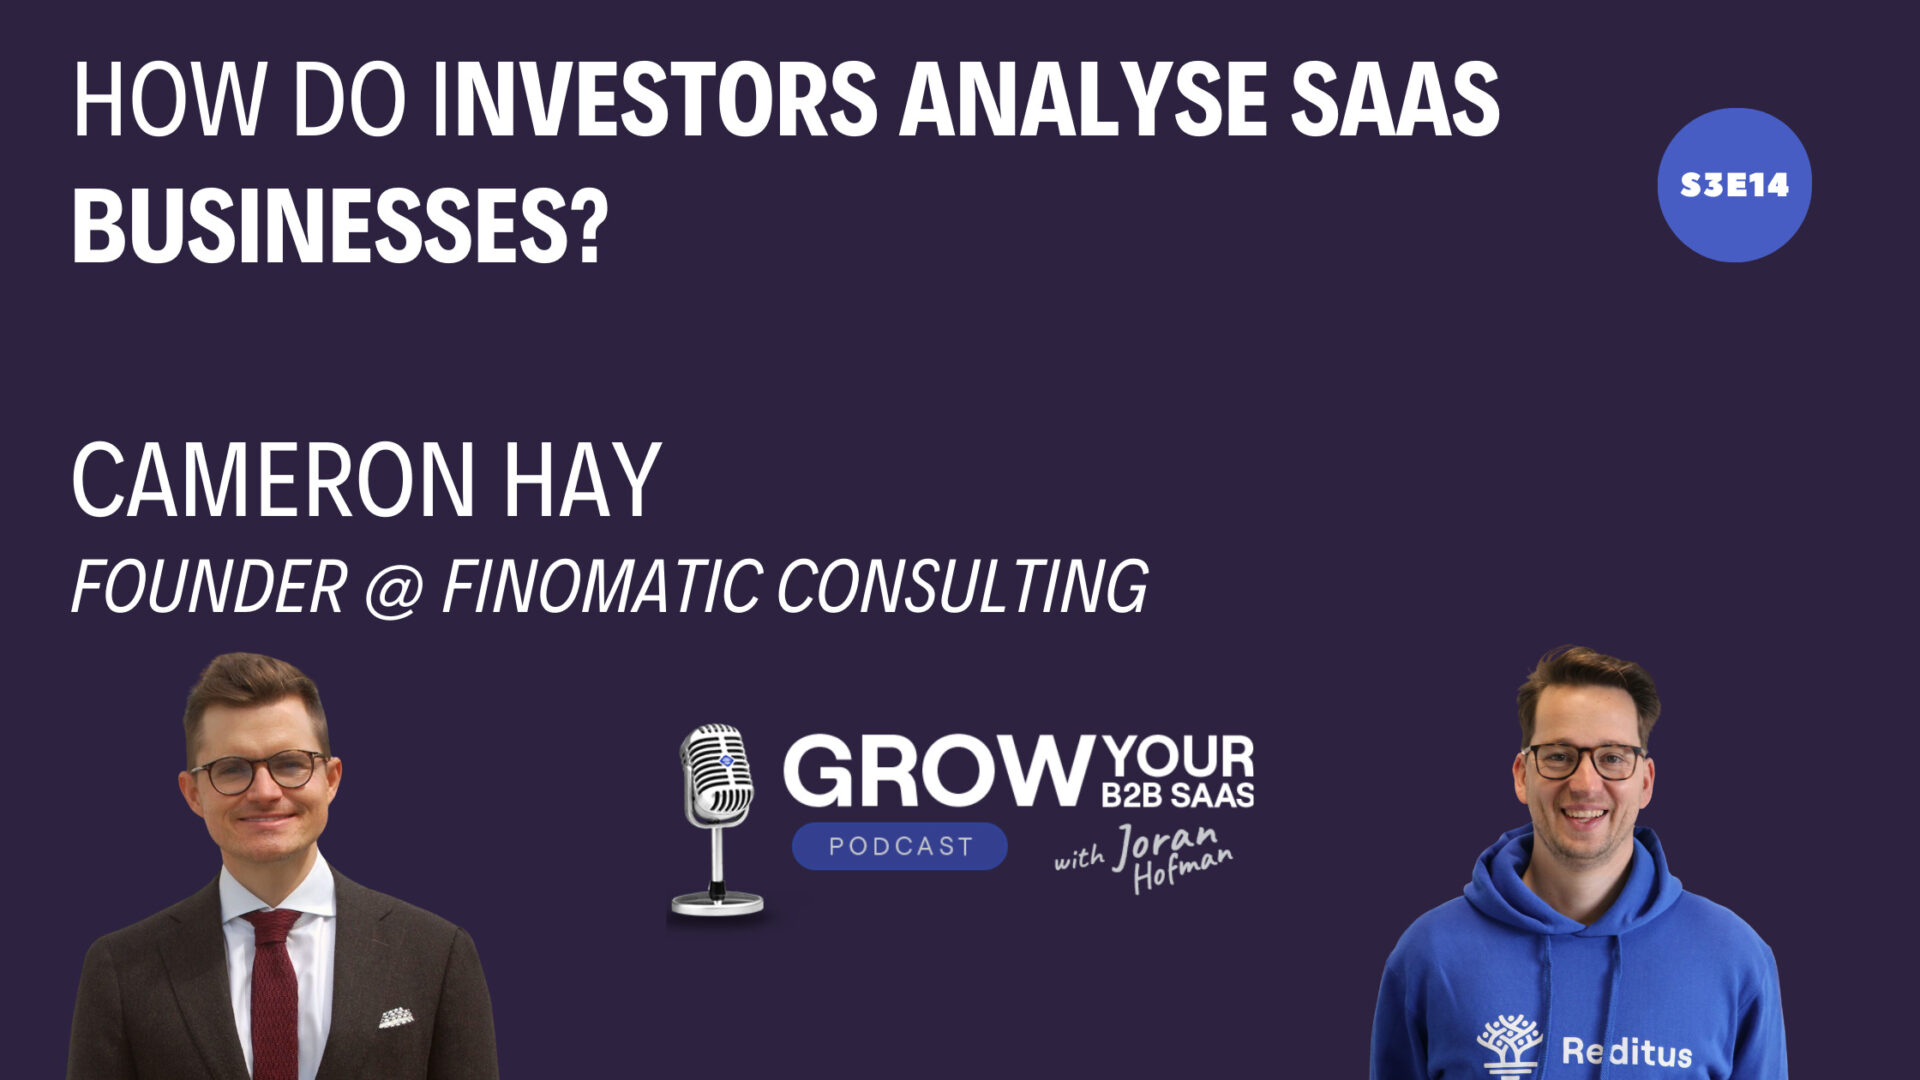 S3E14 – How do investors analyse SaaS businesses? With Cameron Hay